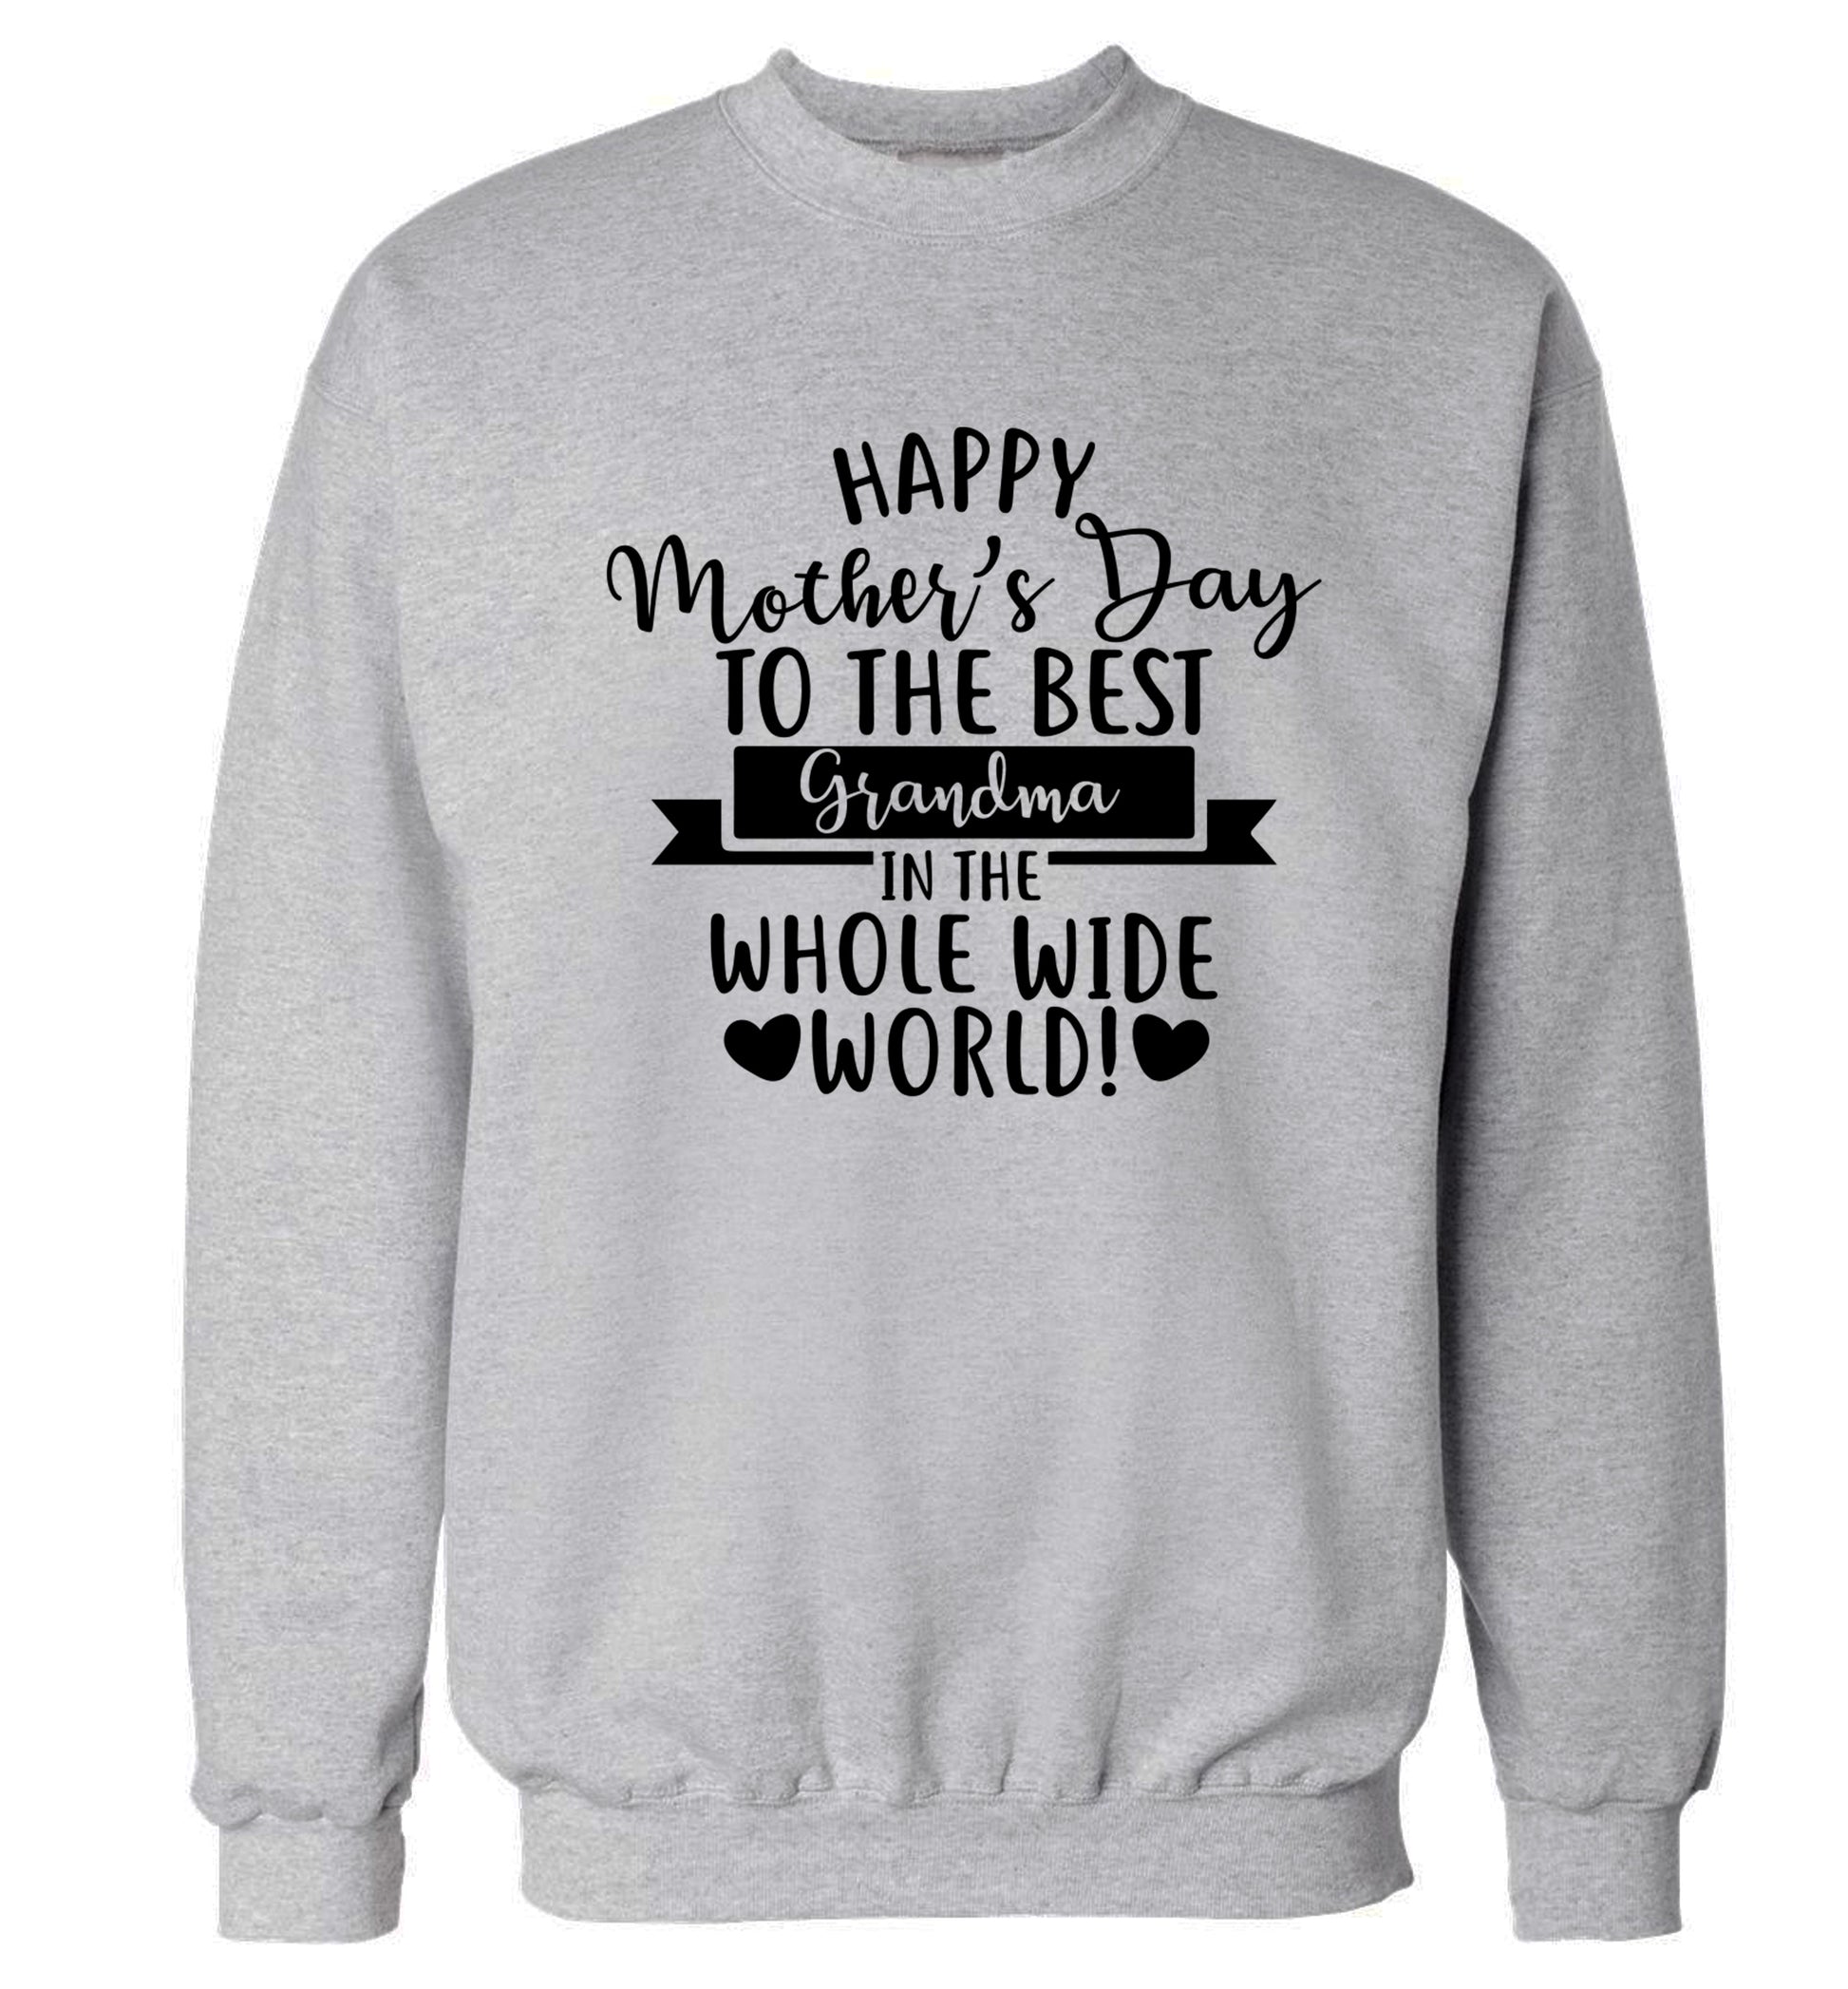 Happy mother's day to the best Grandma in the world Adult's unisex grey Sweater 2XL